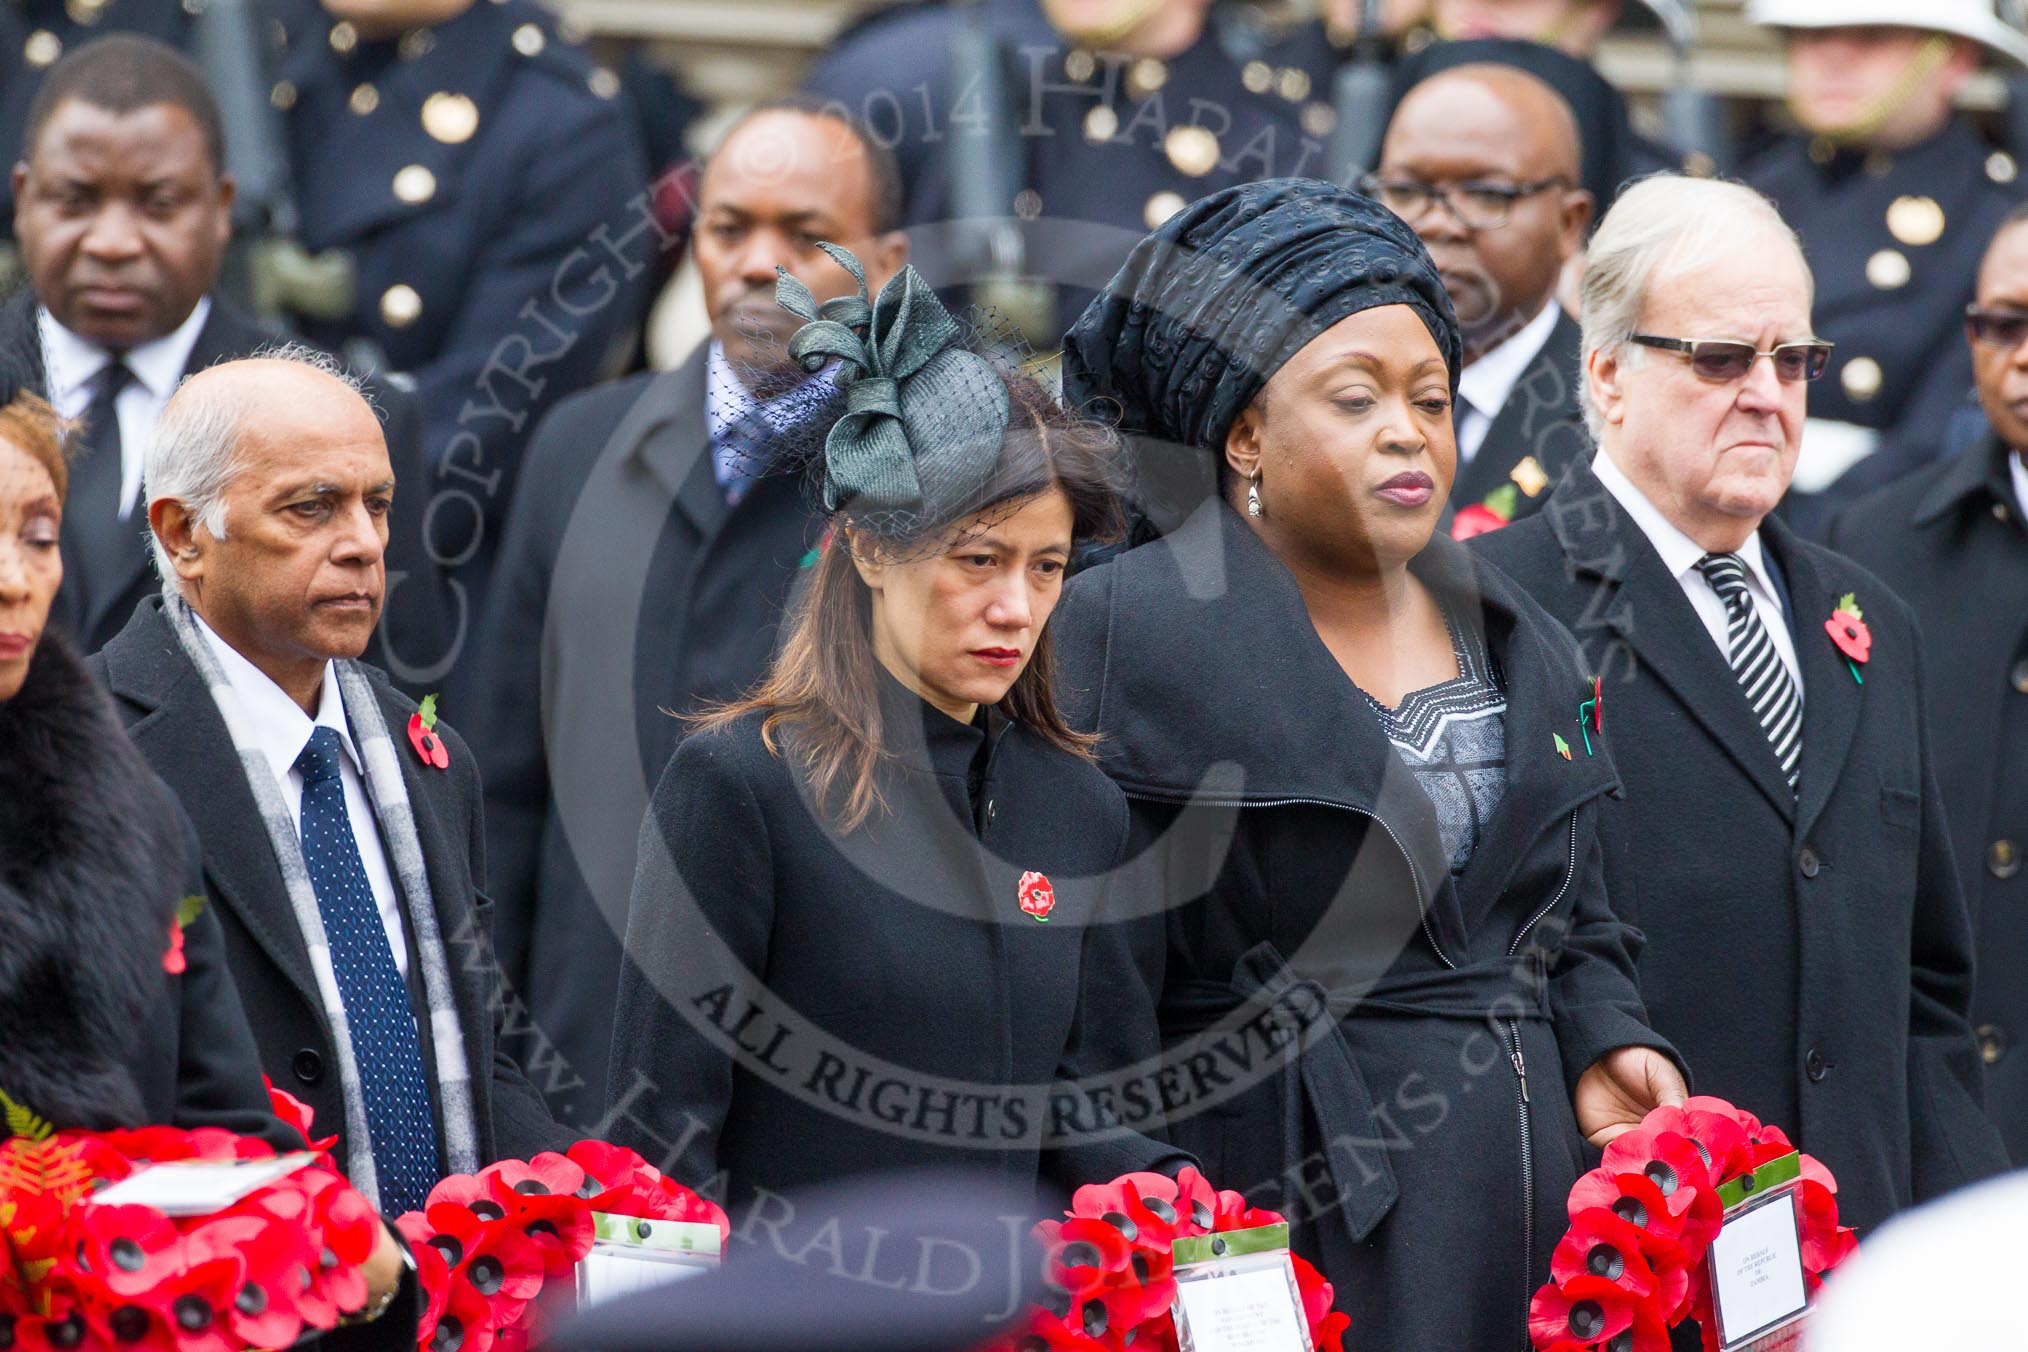 Remembrance Sunday at the Cenotaph in London 2014: The High Commissioner of Guyana, the High Commissioner of Singapore, the High Commissioner of Zambia and and the High Commissioner of Malta with their wreaths at the Cenotaph.
Press stand opposite the Foreign Office building, Whitehall, London SW1,
London,
Greater London,
United Kingdom,
on 09 November 2014 at 11:11, image #247